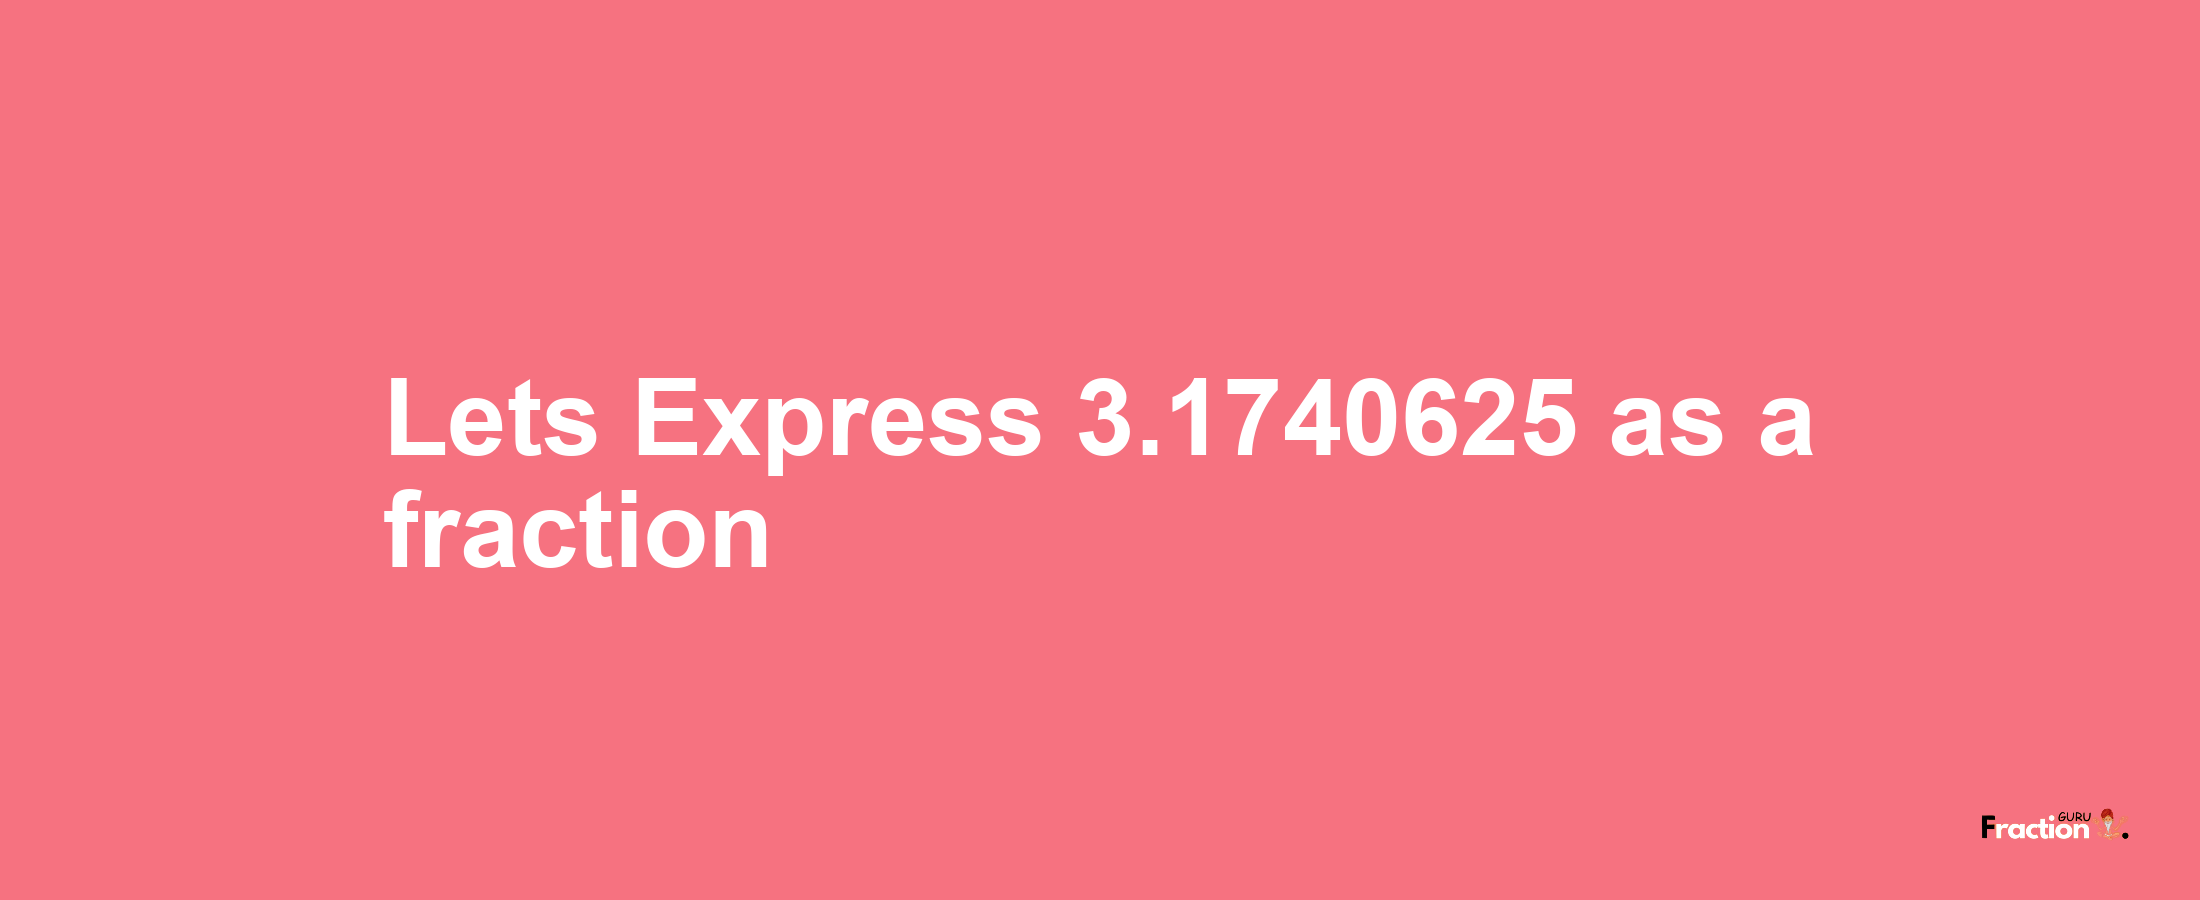 Lets Express 3.1740625 as afraction